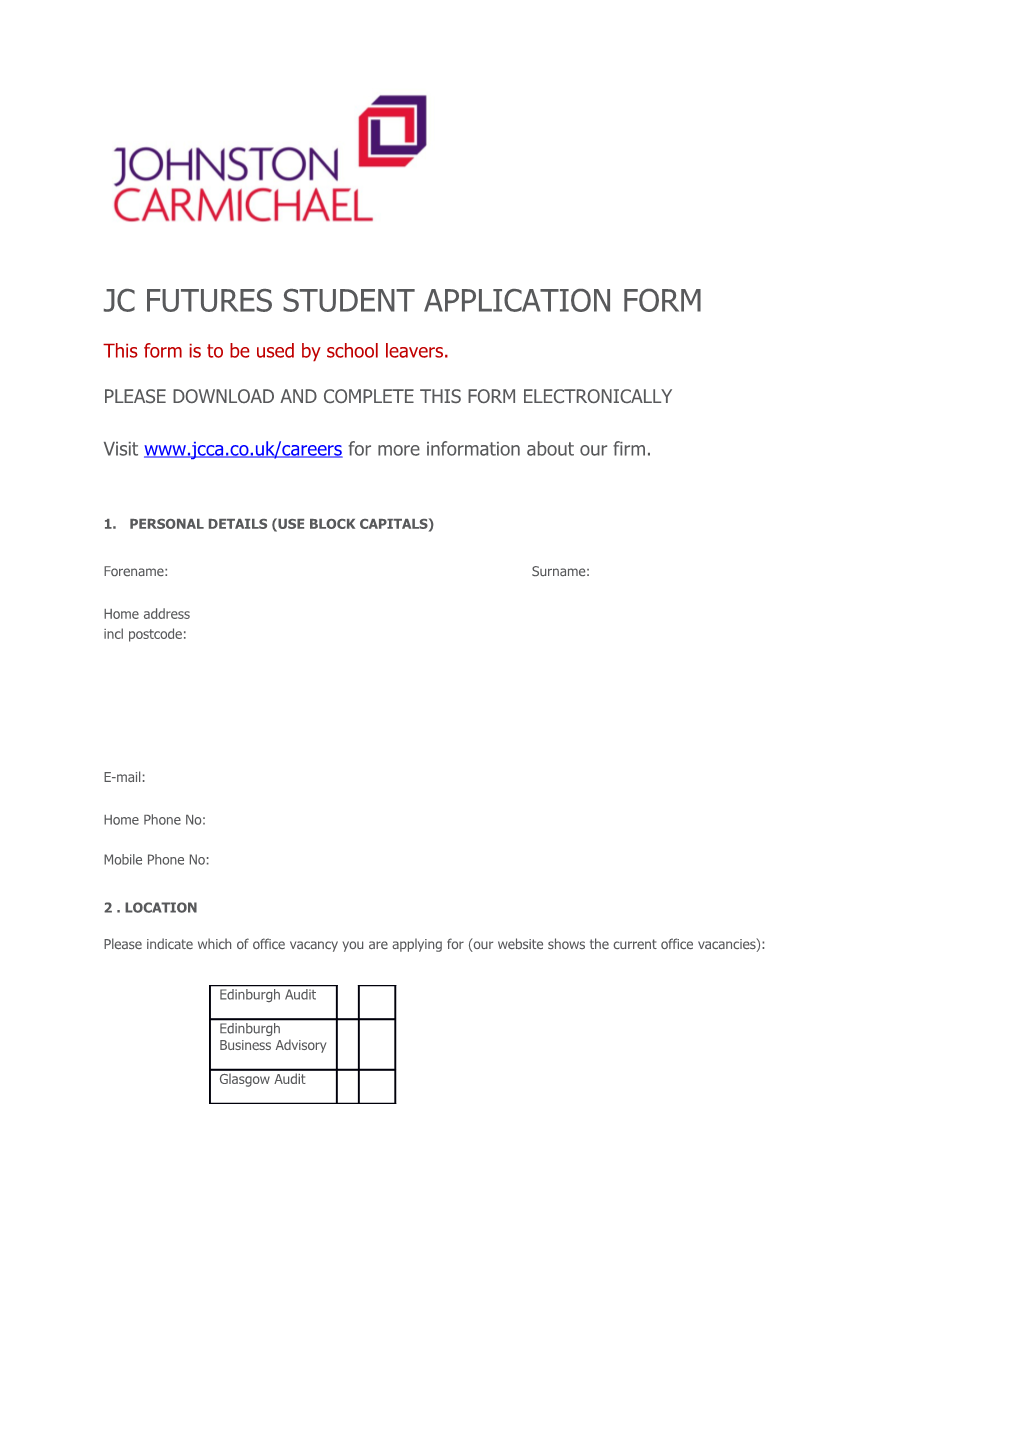 This Form Is to Be Used by School Leavers